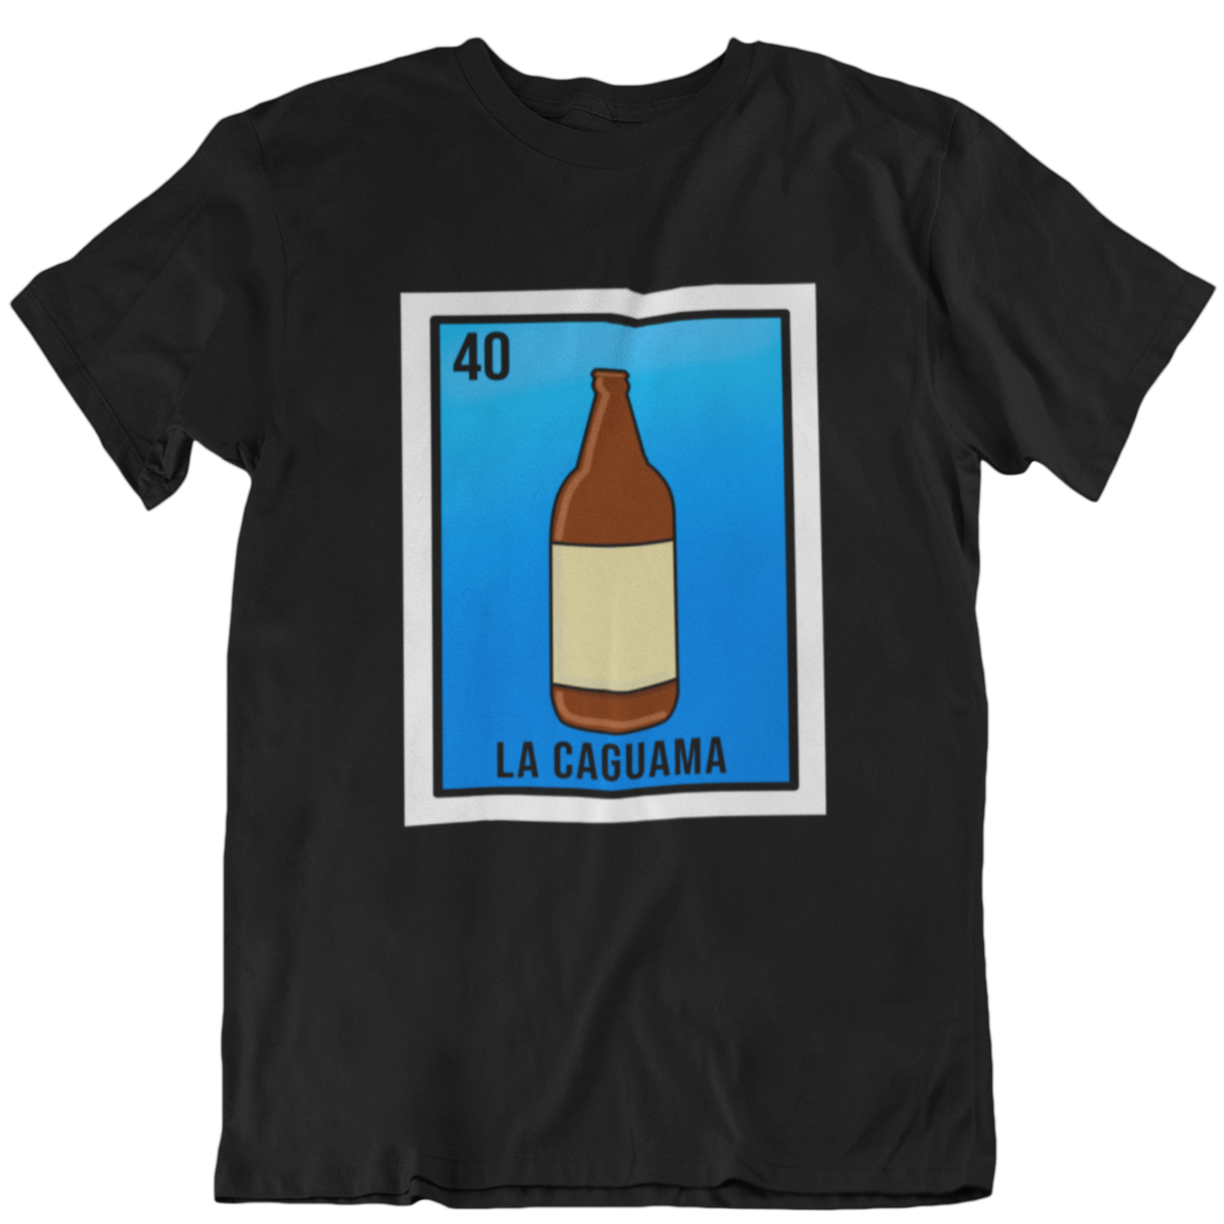 Black t-shirt for Latino men featuring a cartoon-style beer bottle and the text "la caguama" in a Lotería-inspired design.